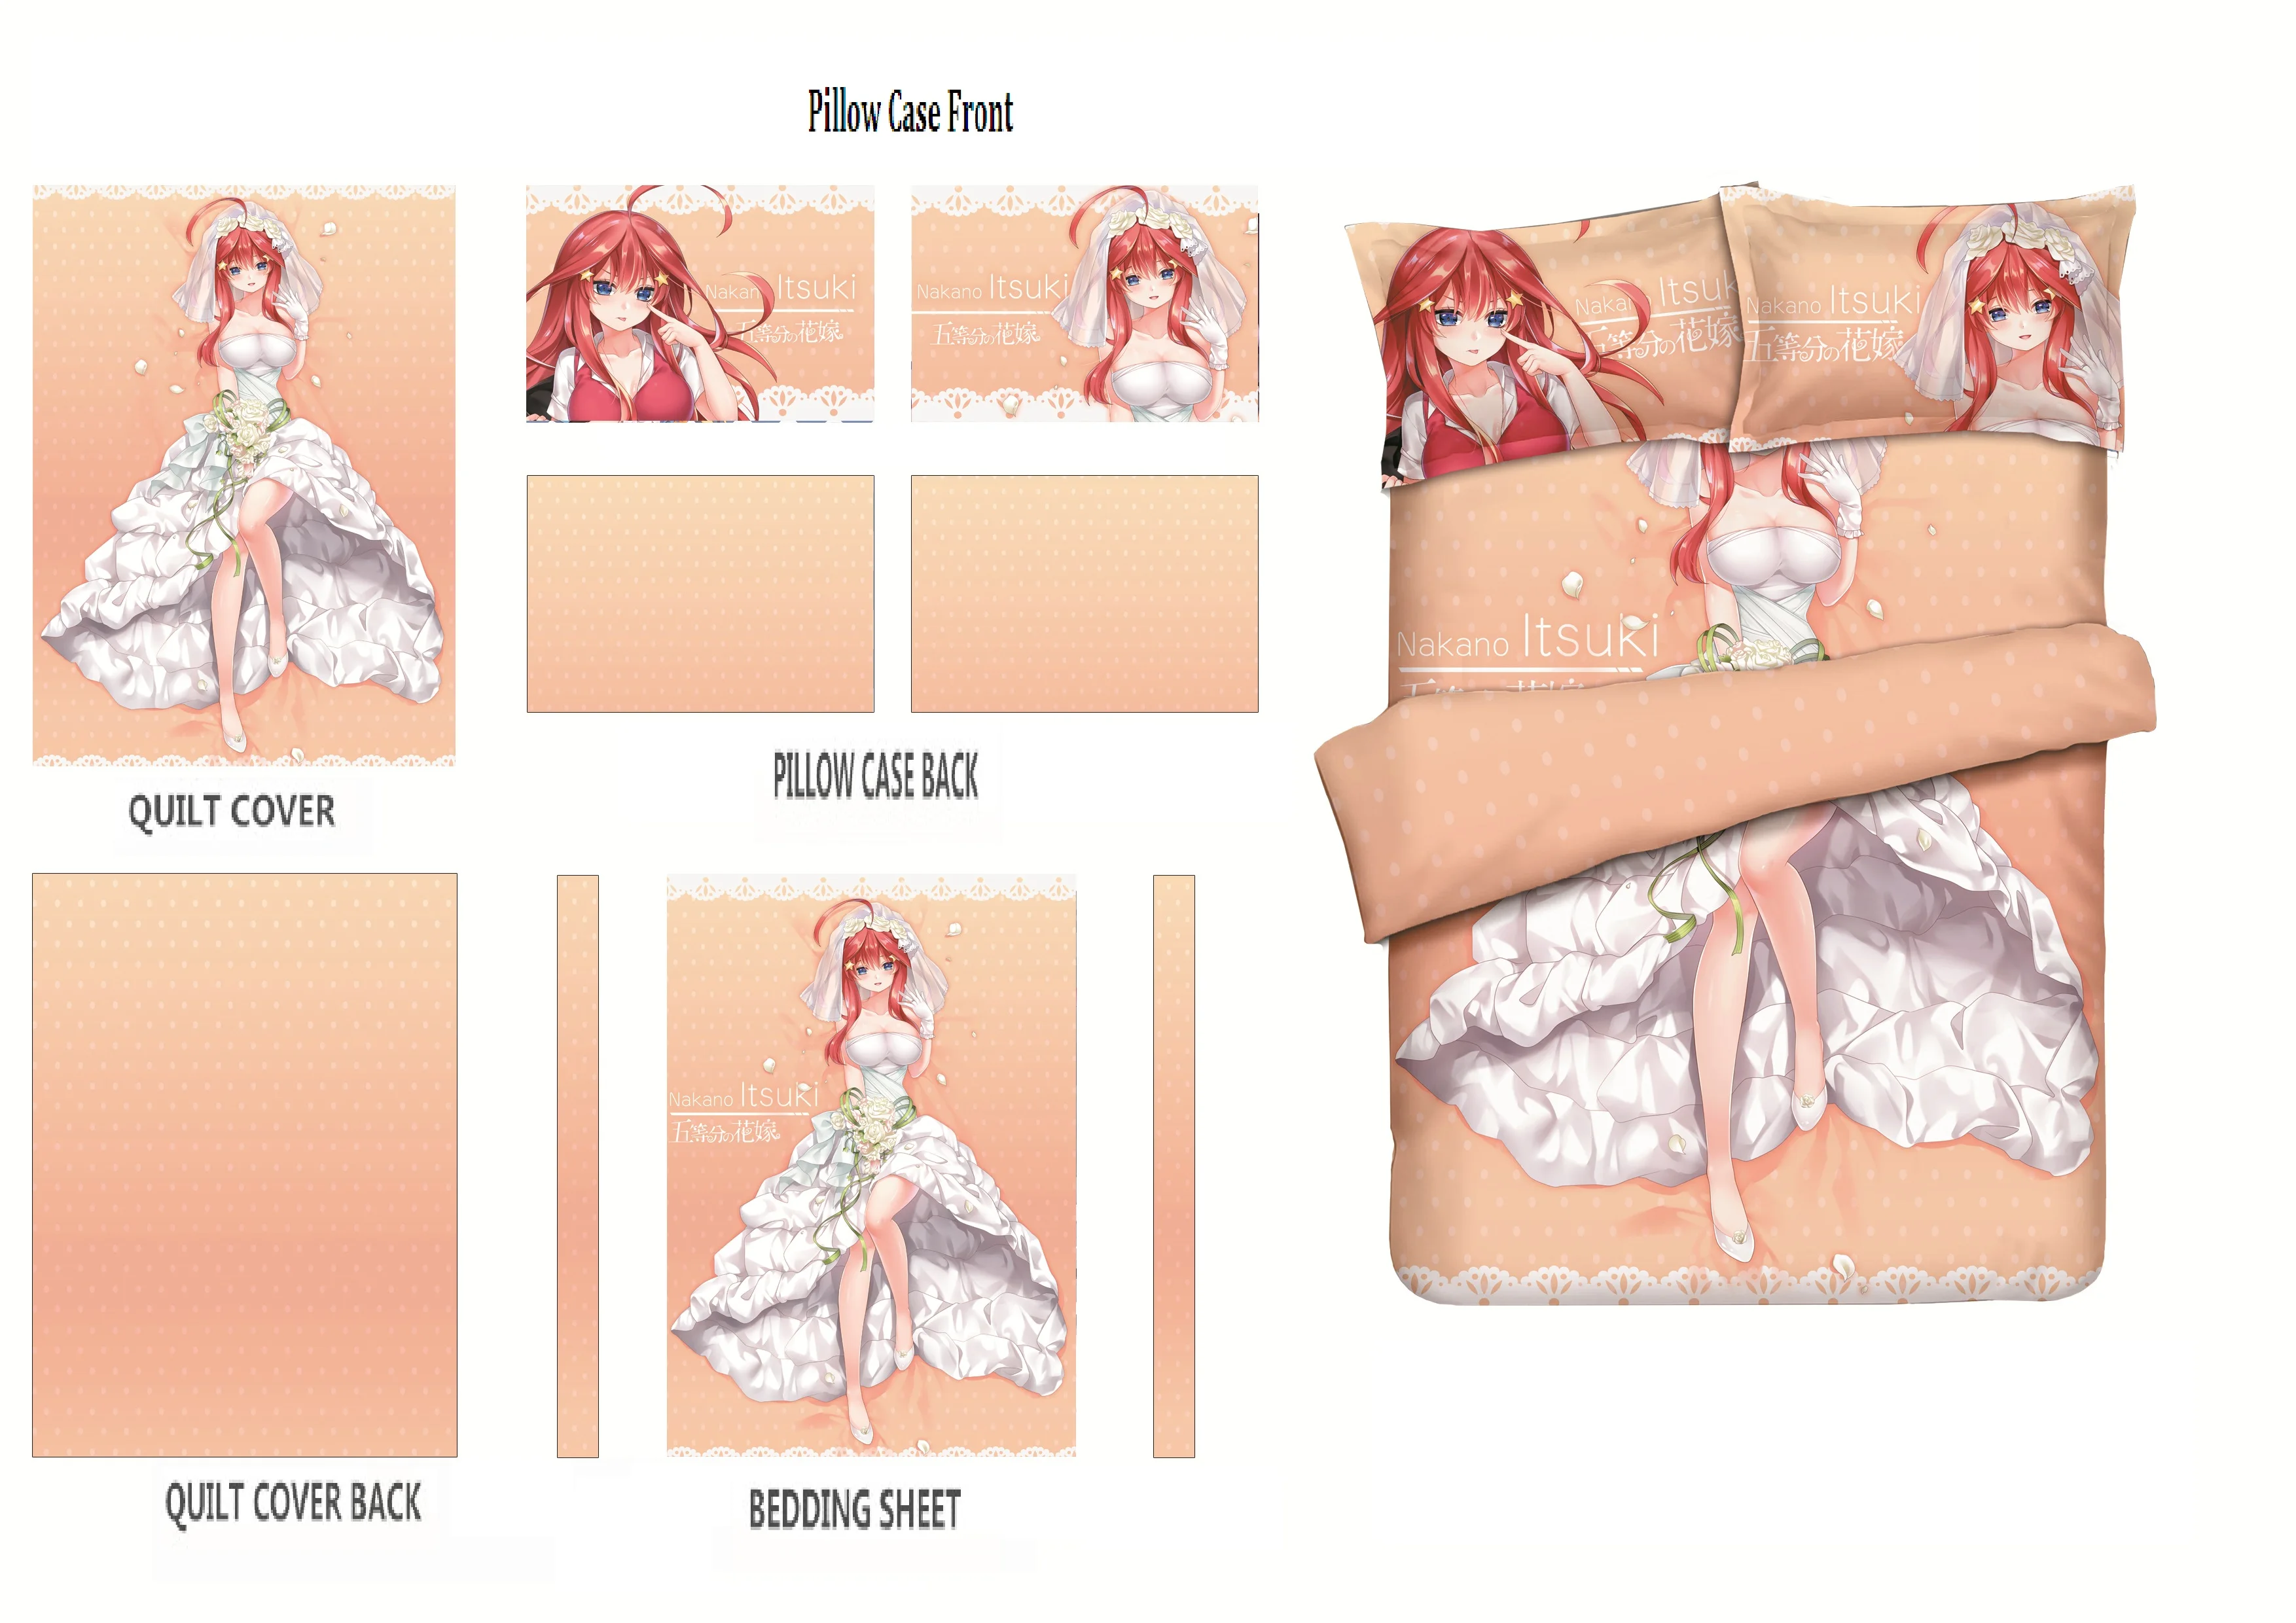 Details about   Anime The Quintessential Quintuplets Lolita Flannel Blanket Bedding Bedsheet Aw5 